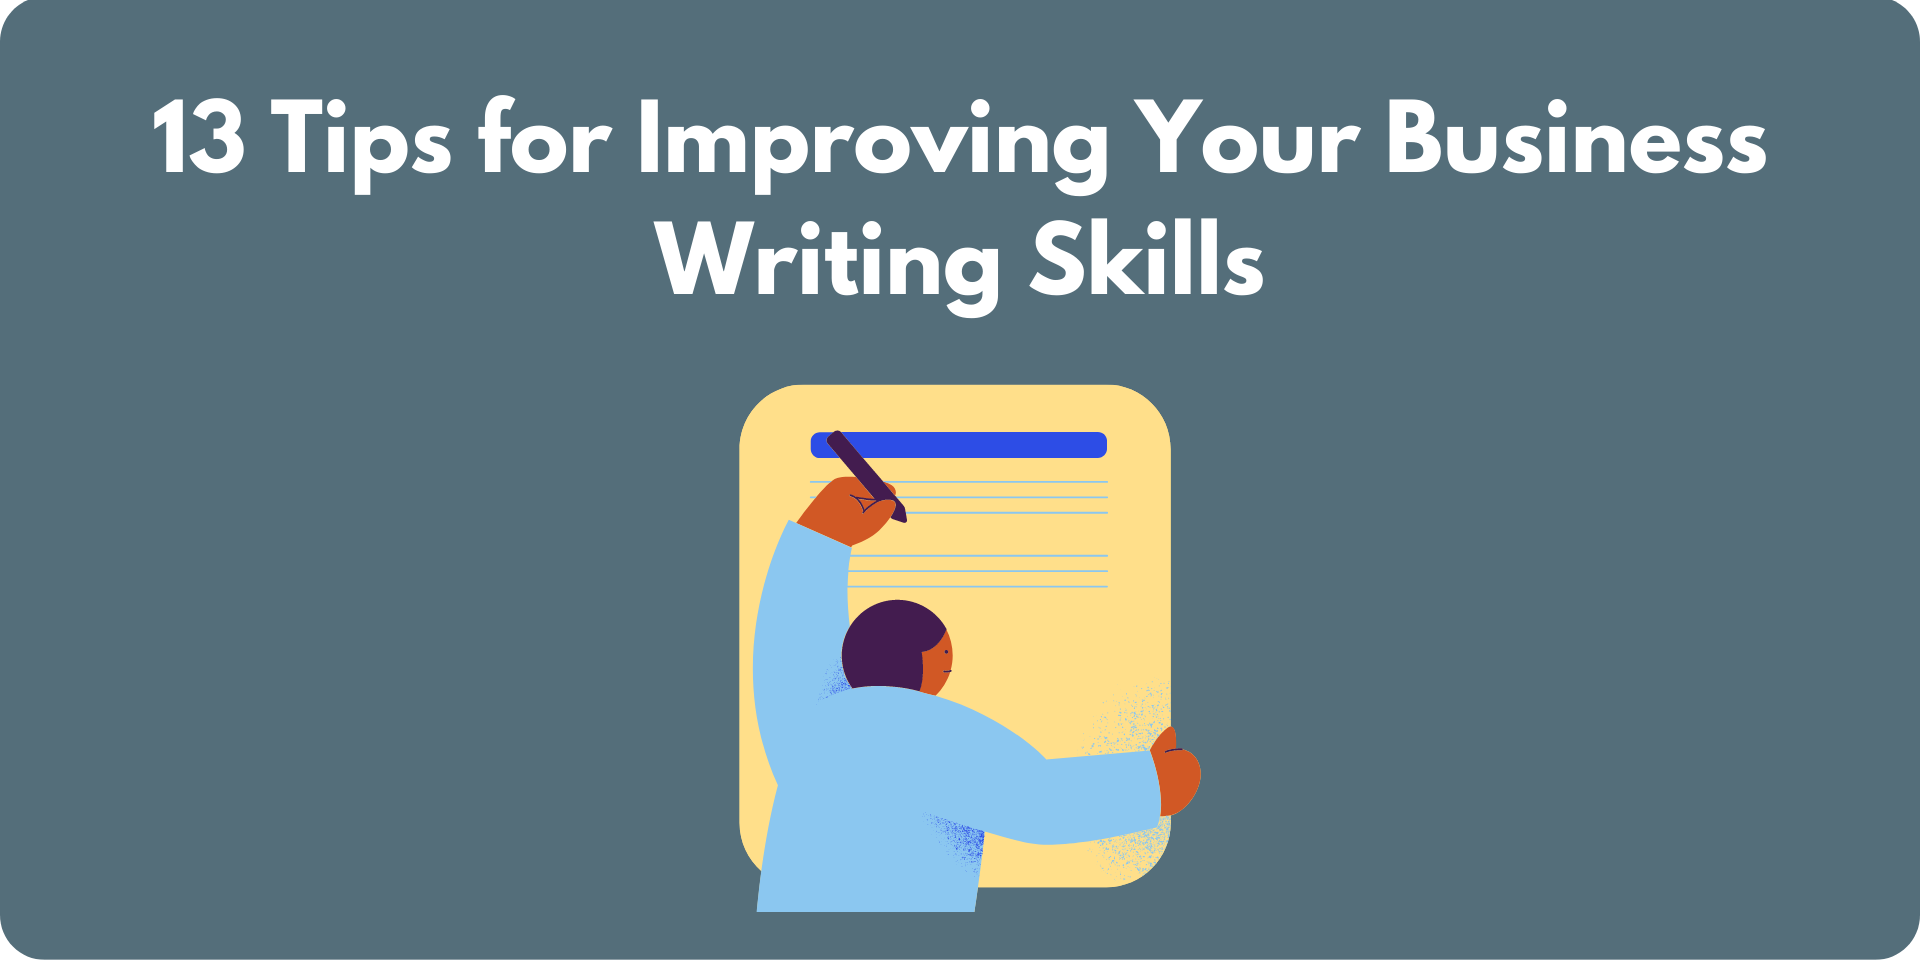 13 Tips for Improving Your Business Writing Skills